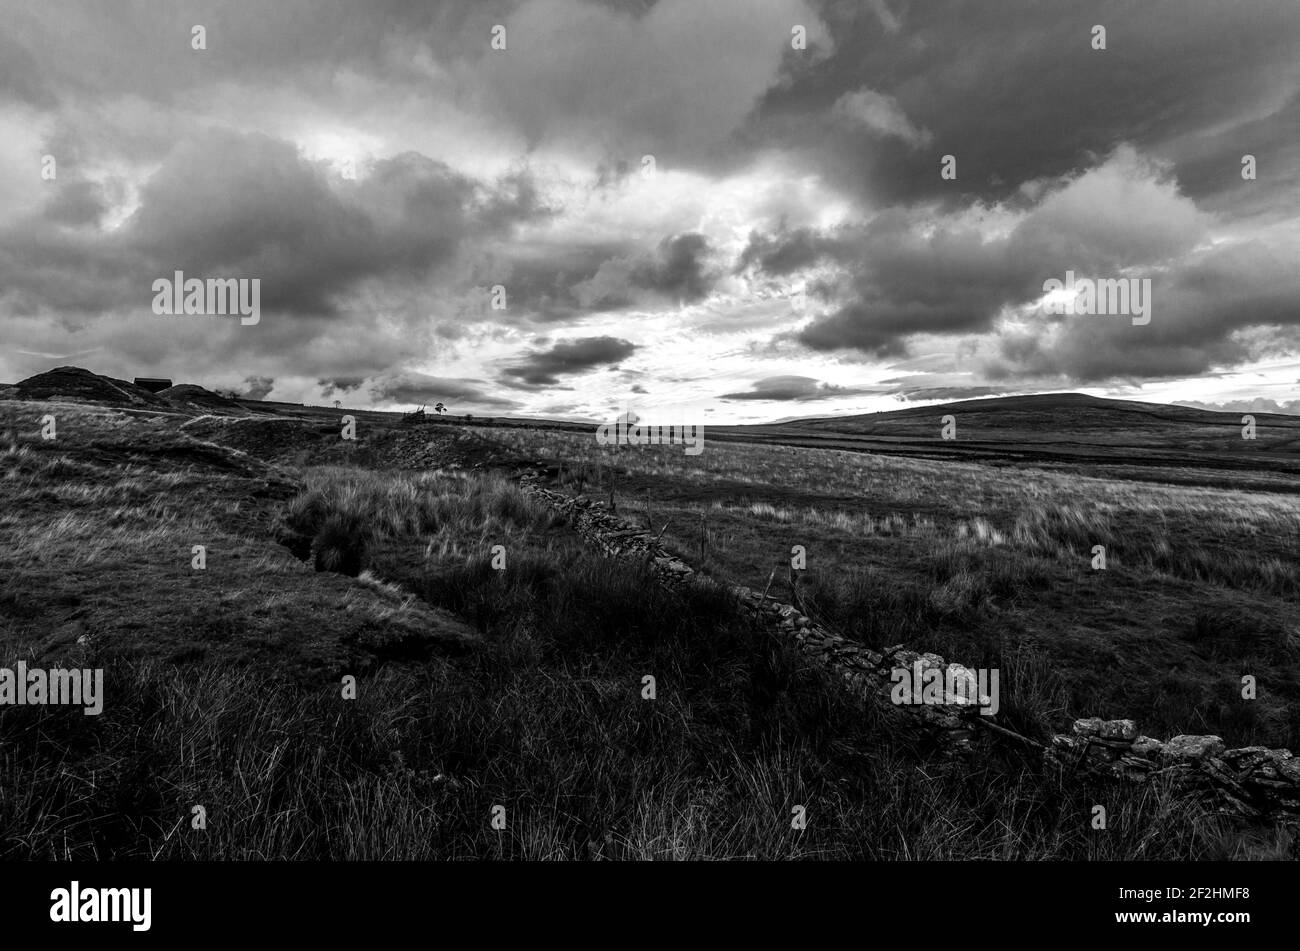 A forbidding landscape of dry stone walls, windswept fields and cloud skies in the North Pennines, Weardale, County Durham, UK.(B&W) Stock Photo